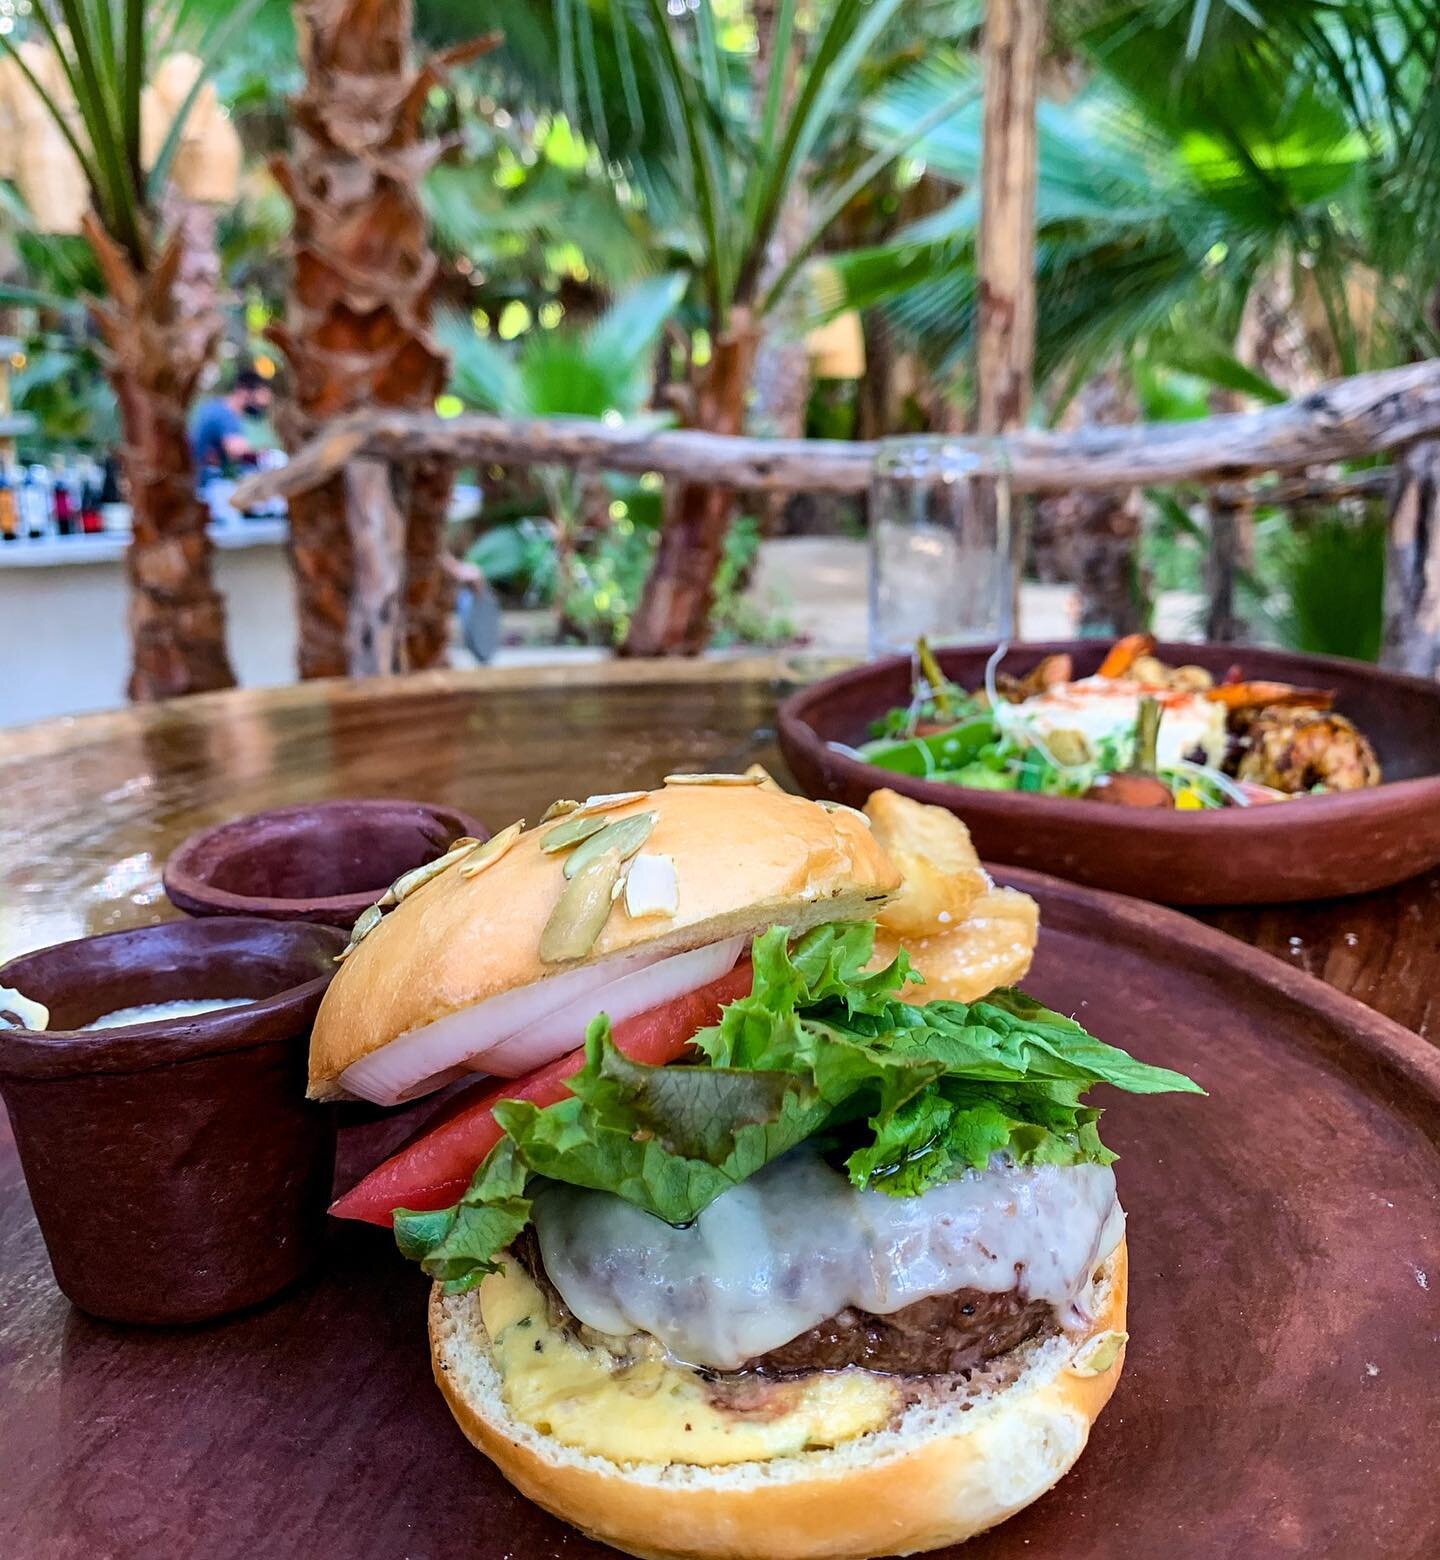 &ldquo;Pueblo m&aacute;gico&rdquo;: a magical palm grove off the beaten path. Are you ready to go on adventure with us?

🆆🅷🅰🆃 Dūm serves up Mediterranean cuisine, a true gastronomic experience with fish and organic vegetables sourced from around 